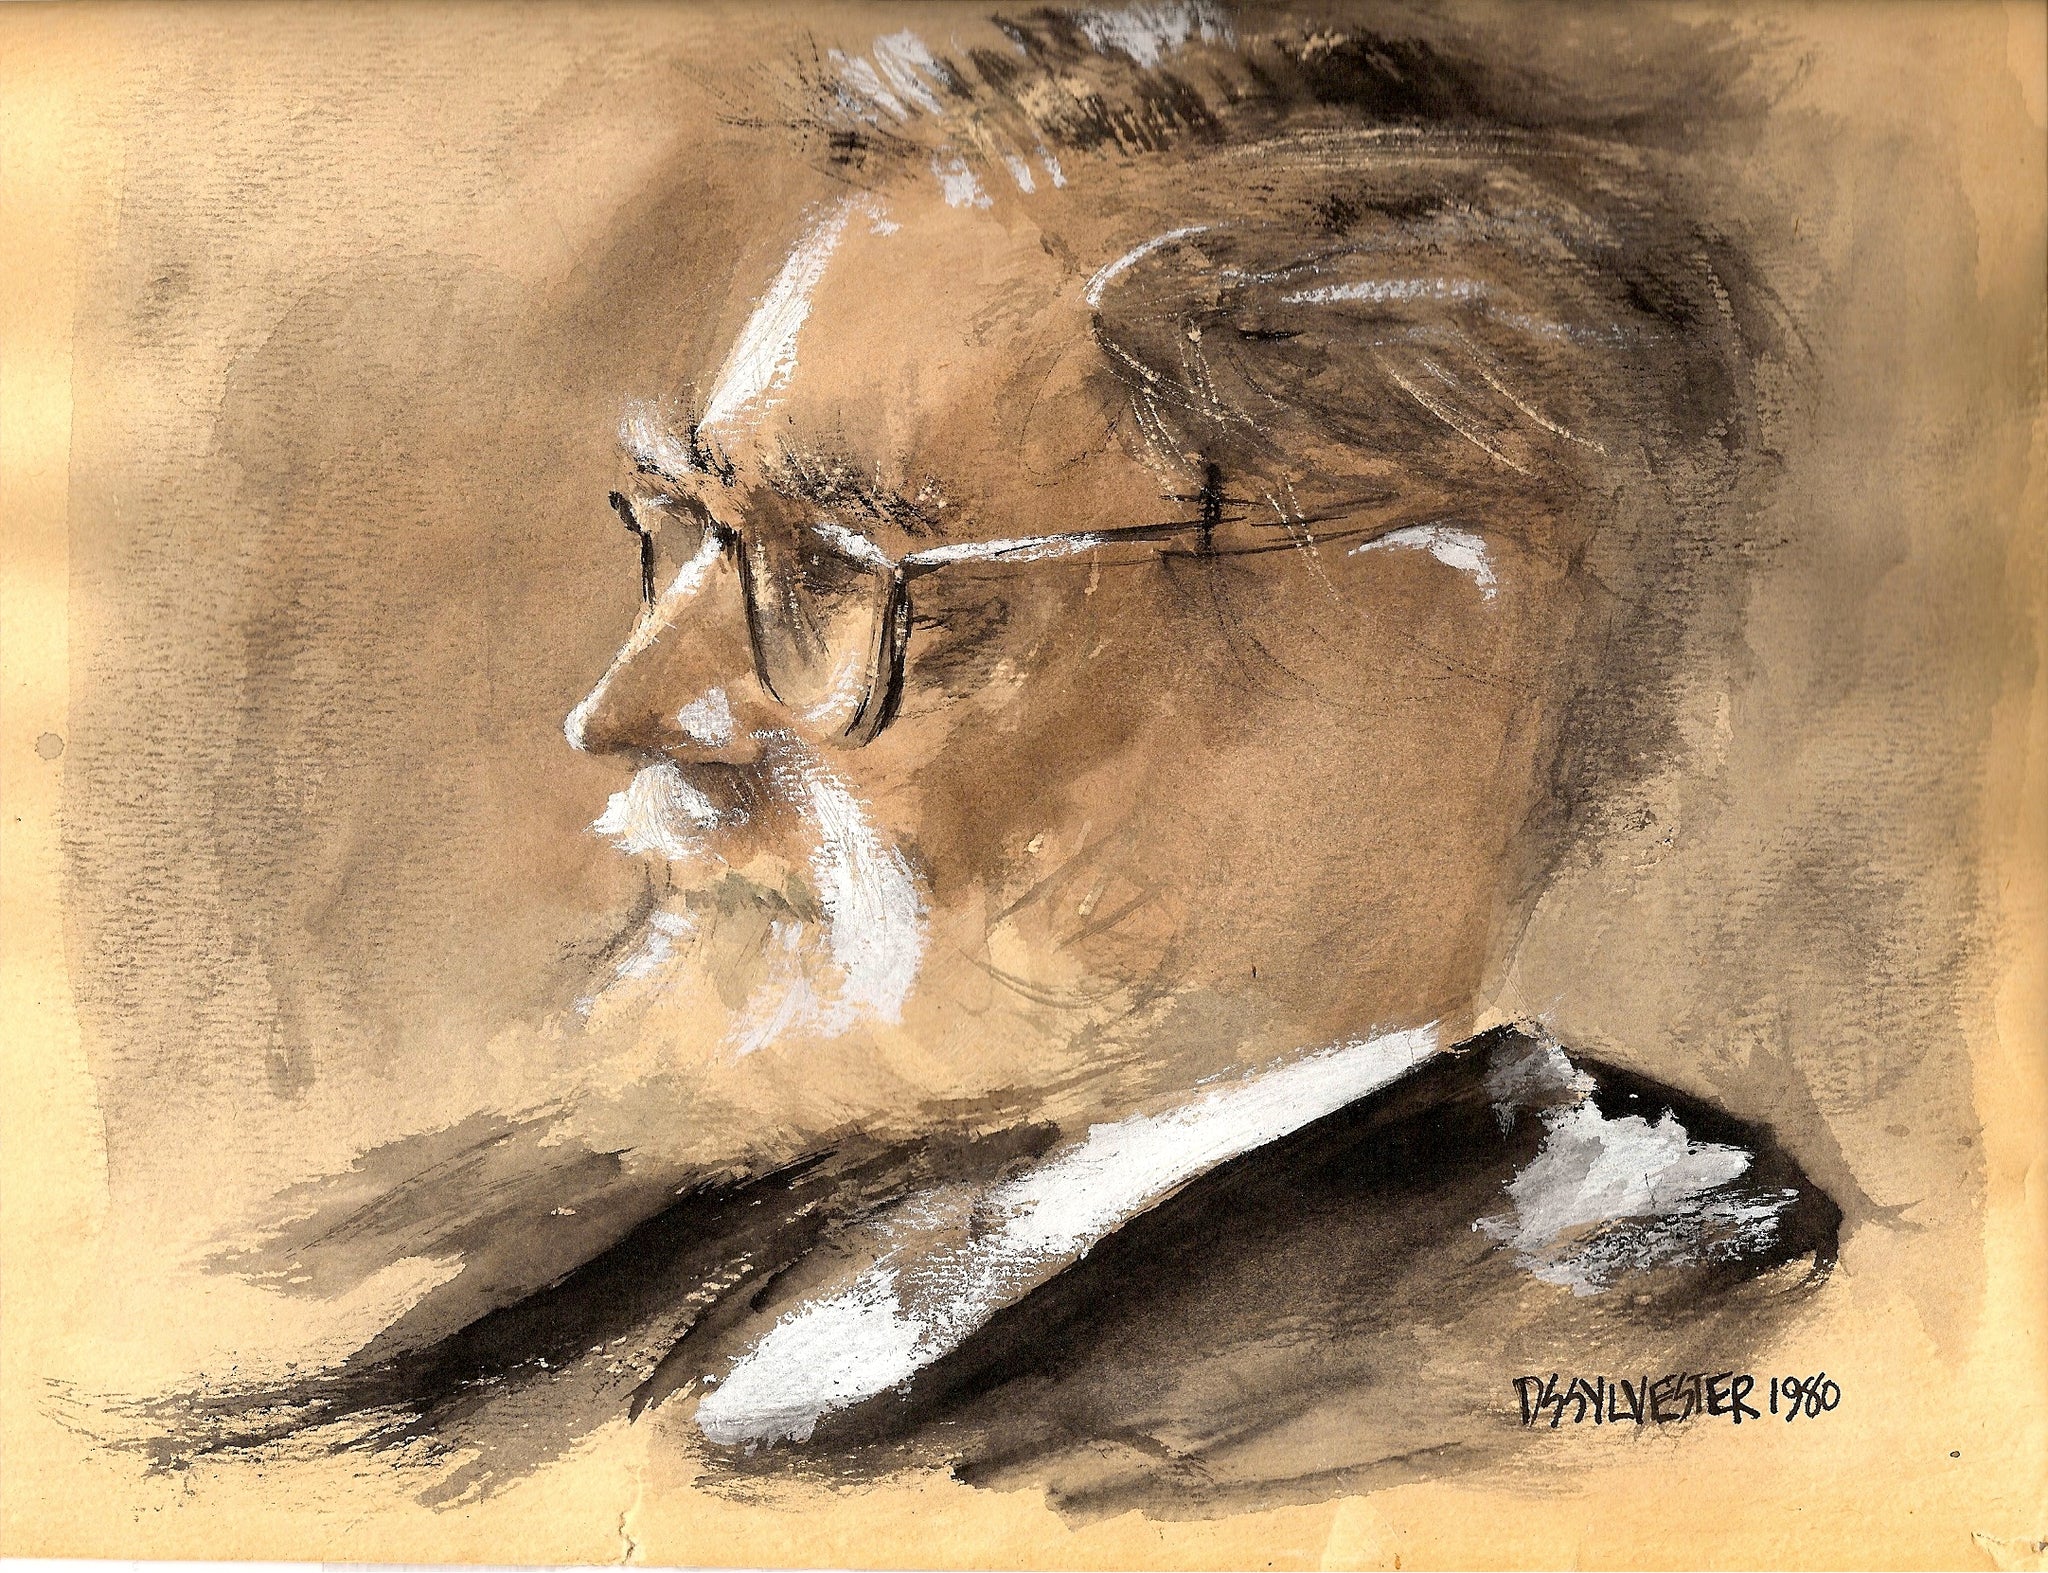 PEOPLE - OLD PROFESSOR IN SUIT AND WEARING GLASSES